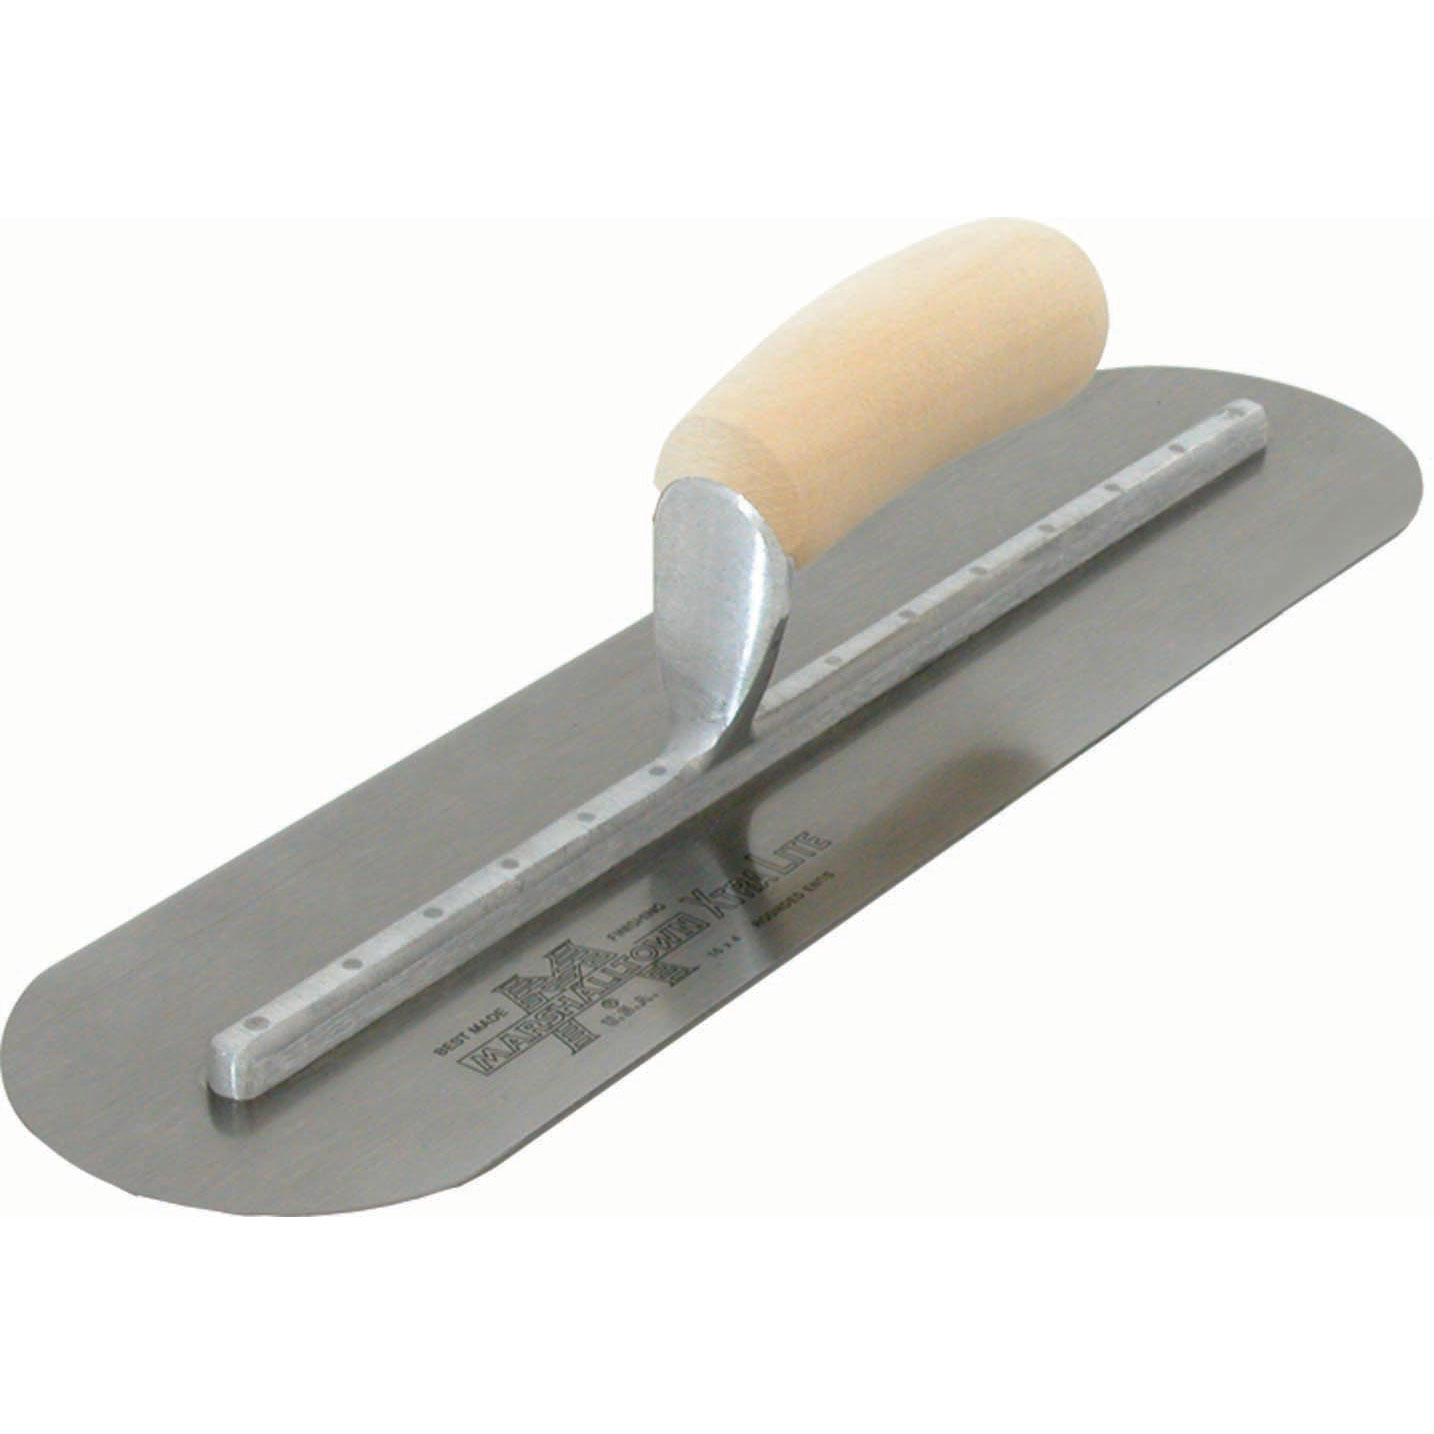 Marshalltown MXS66FR 16in X 4in Finishing Trowel-Round End with Curved Wood Handle MXS66FR